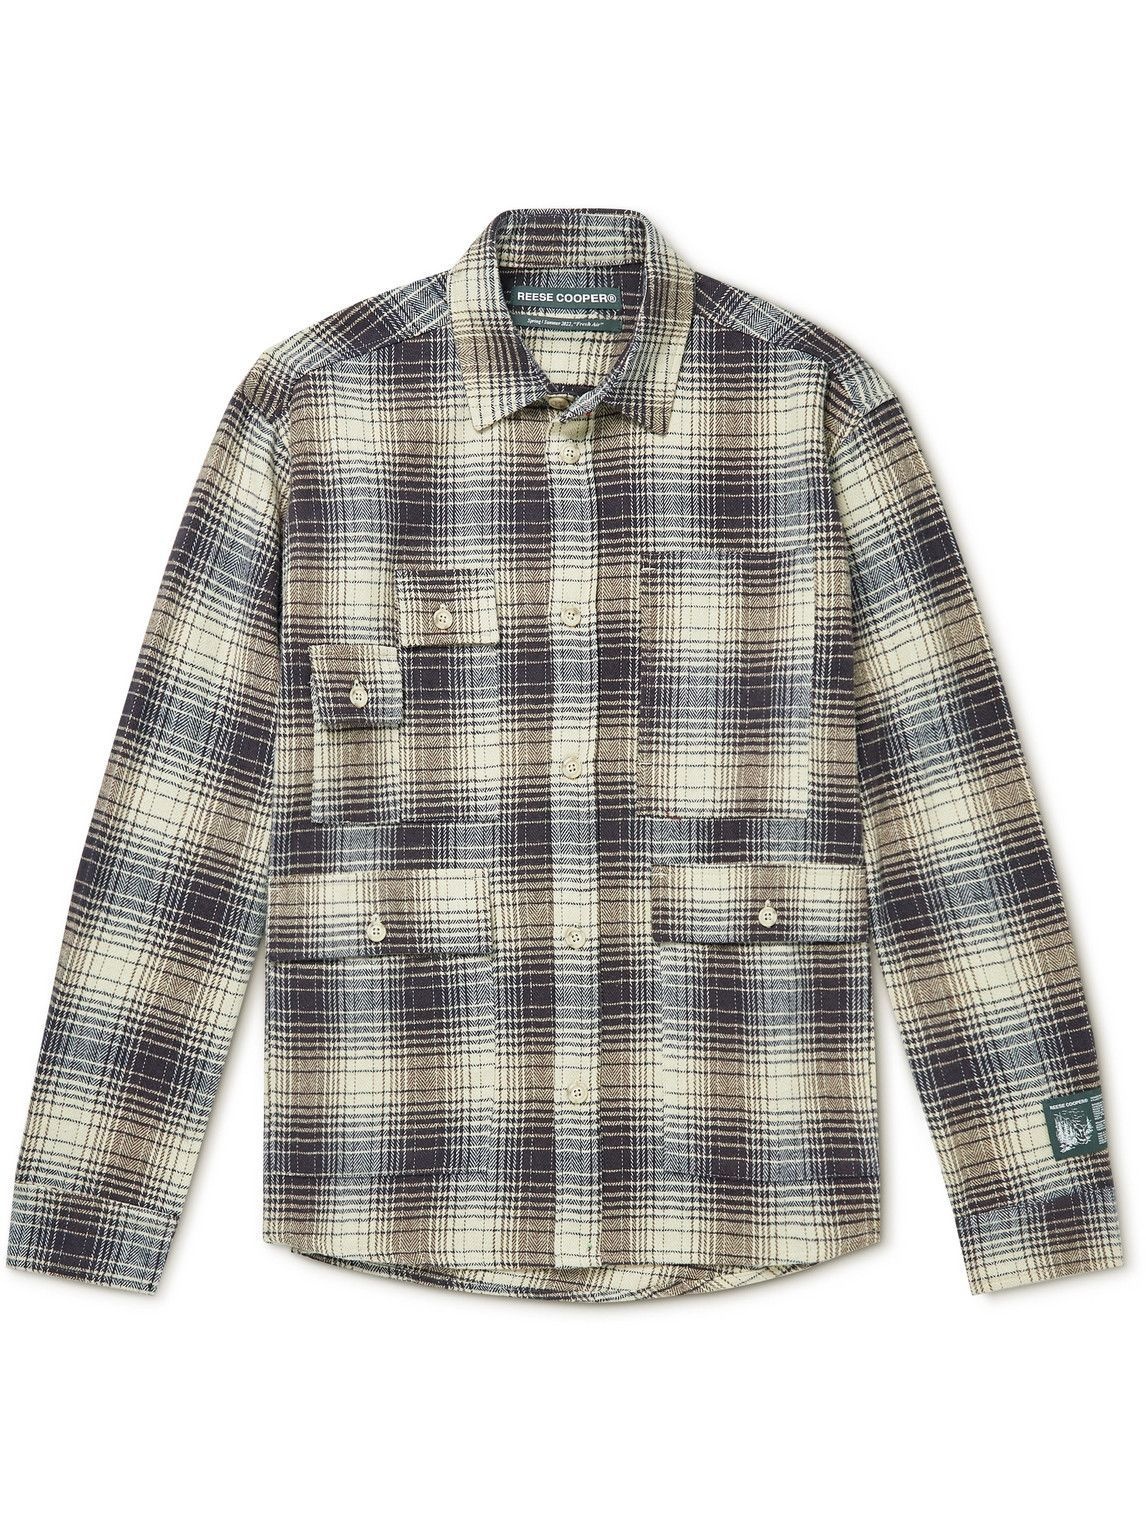 Reese Cooper® - Checked Cotton-Flannel Shirt - Blue Reese Cooper